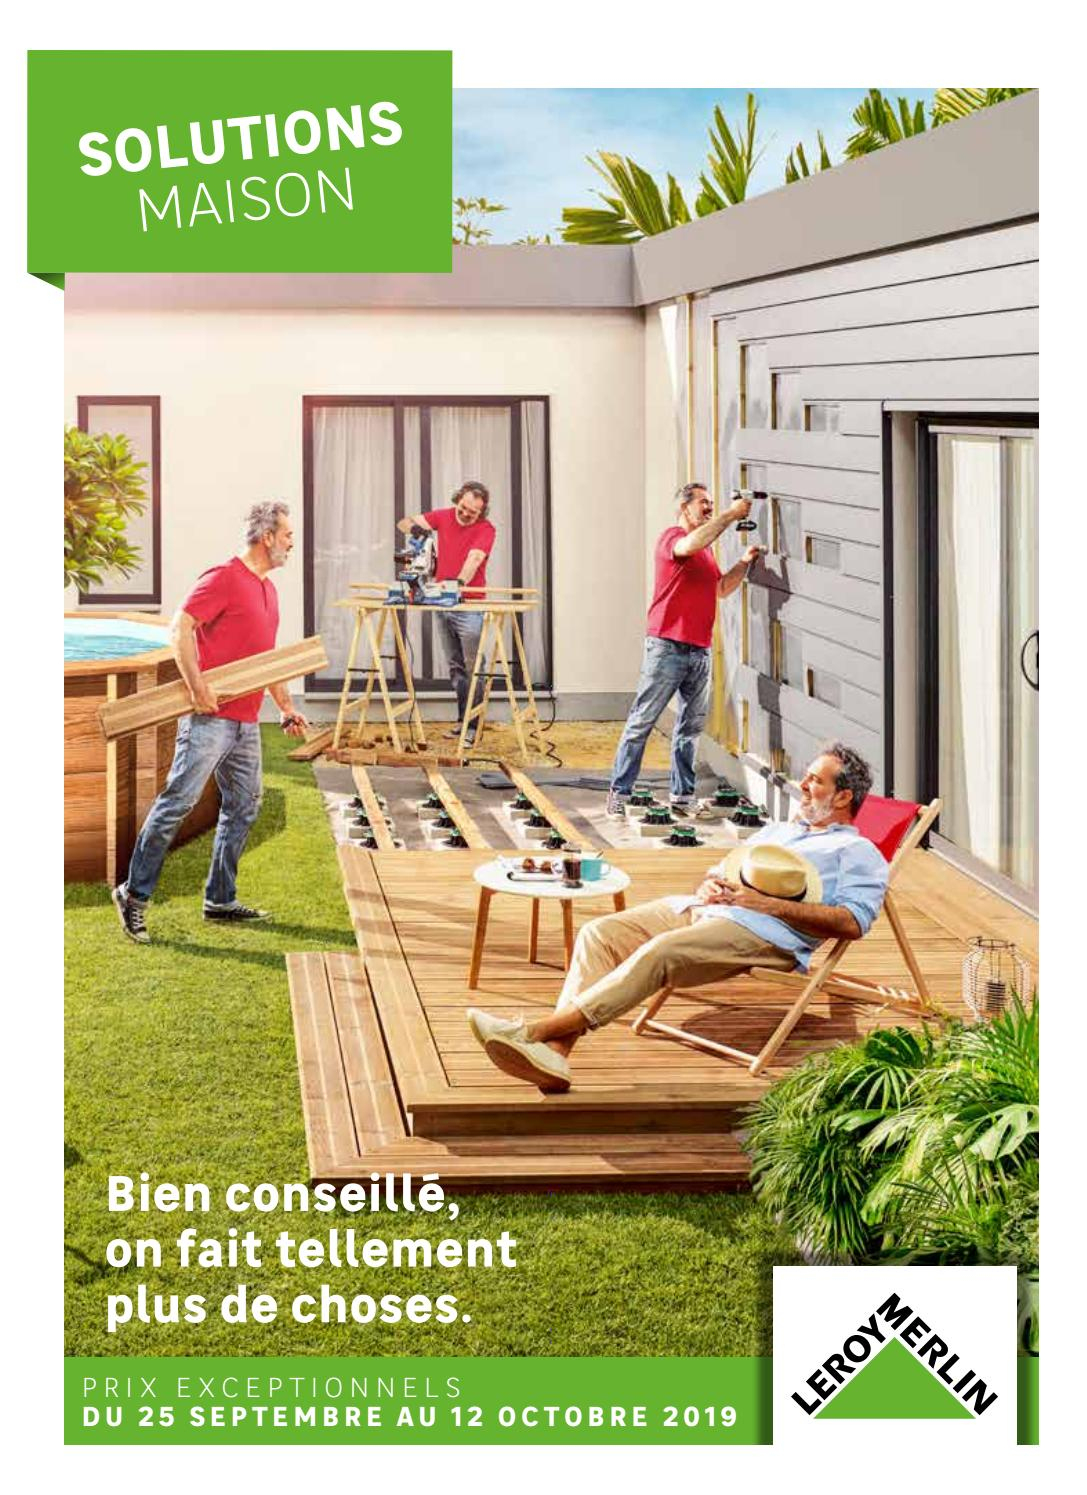 Leroy Merlin : Solutions Maison By Agencecourtcircuit - Issuu dedans Saturateur Luxens Naturel